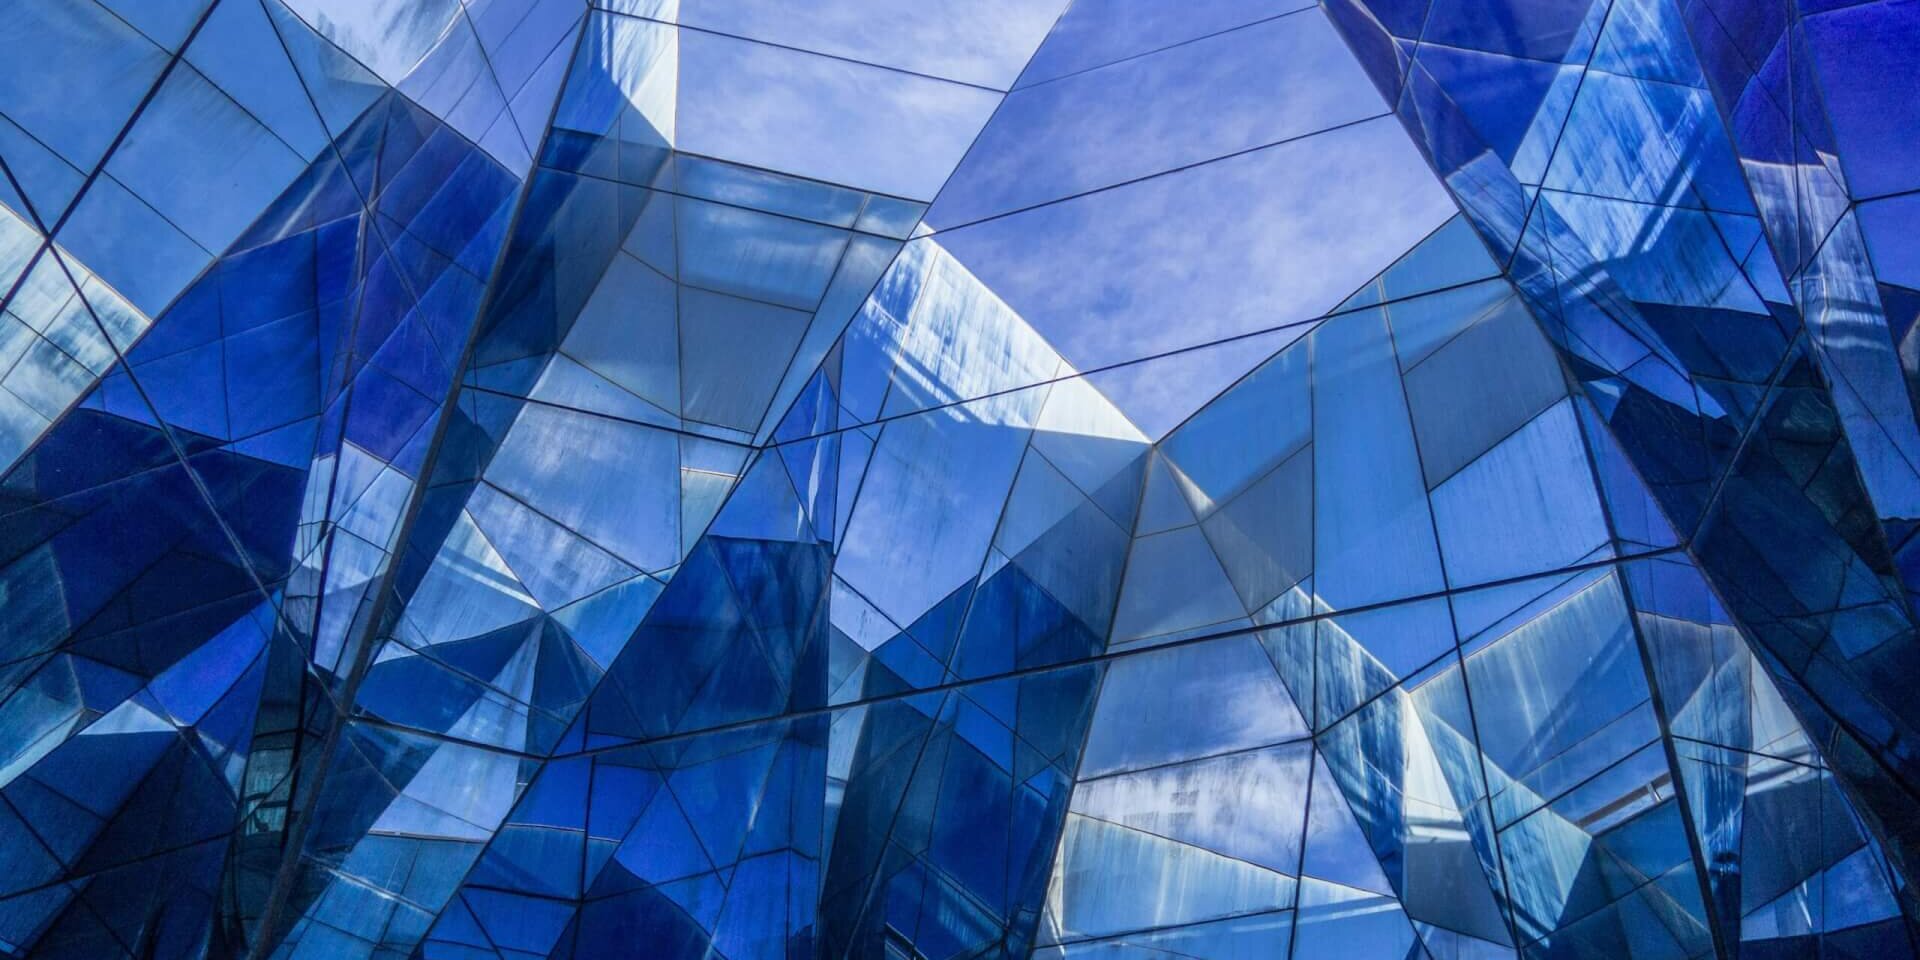 A photo of a blue and white glass building with abstract design